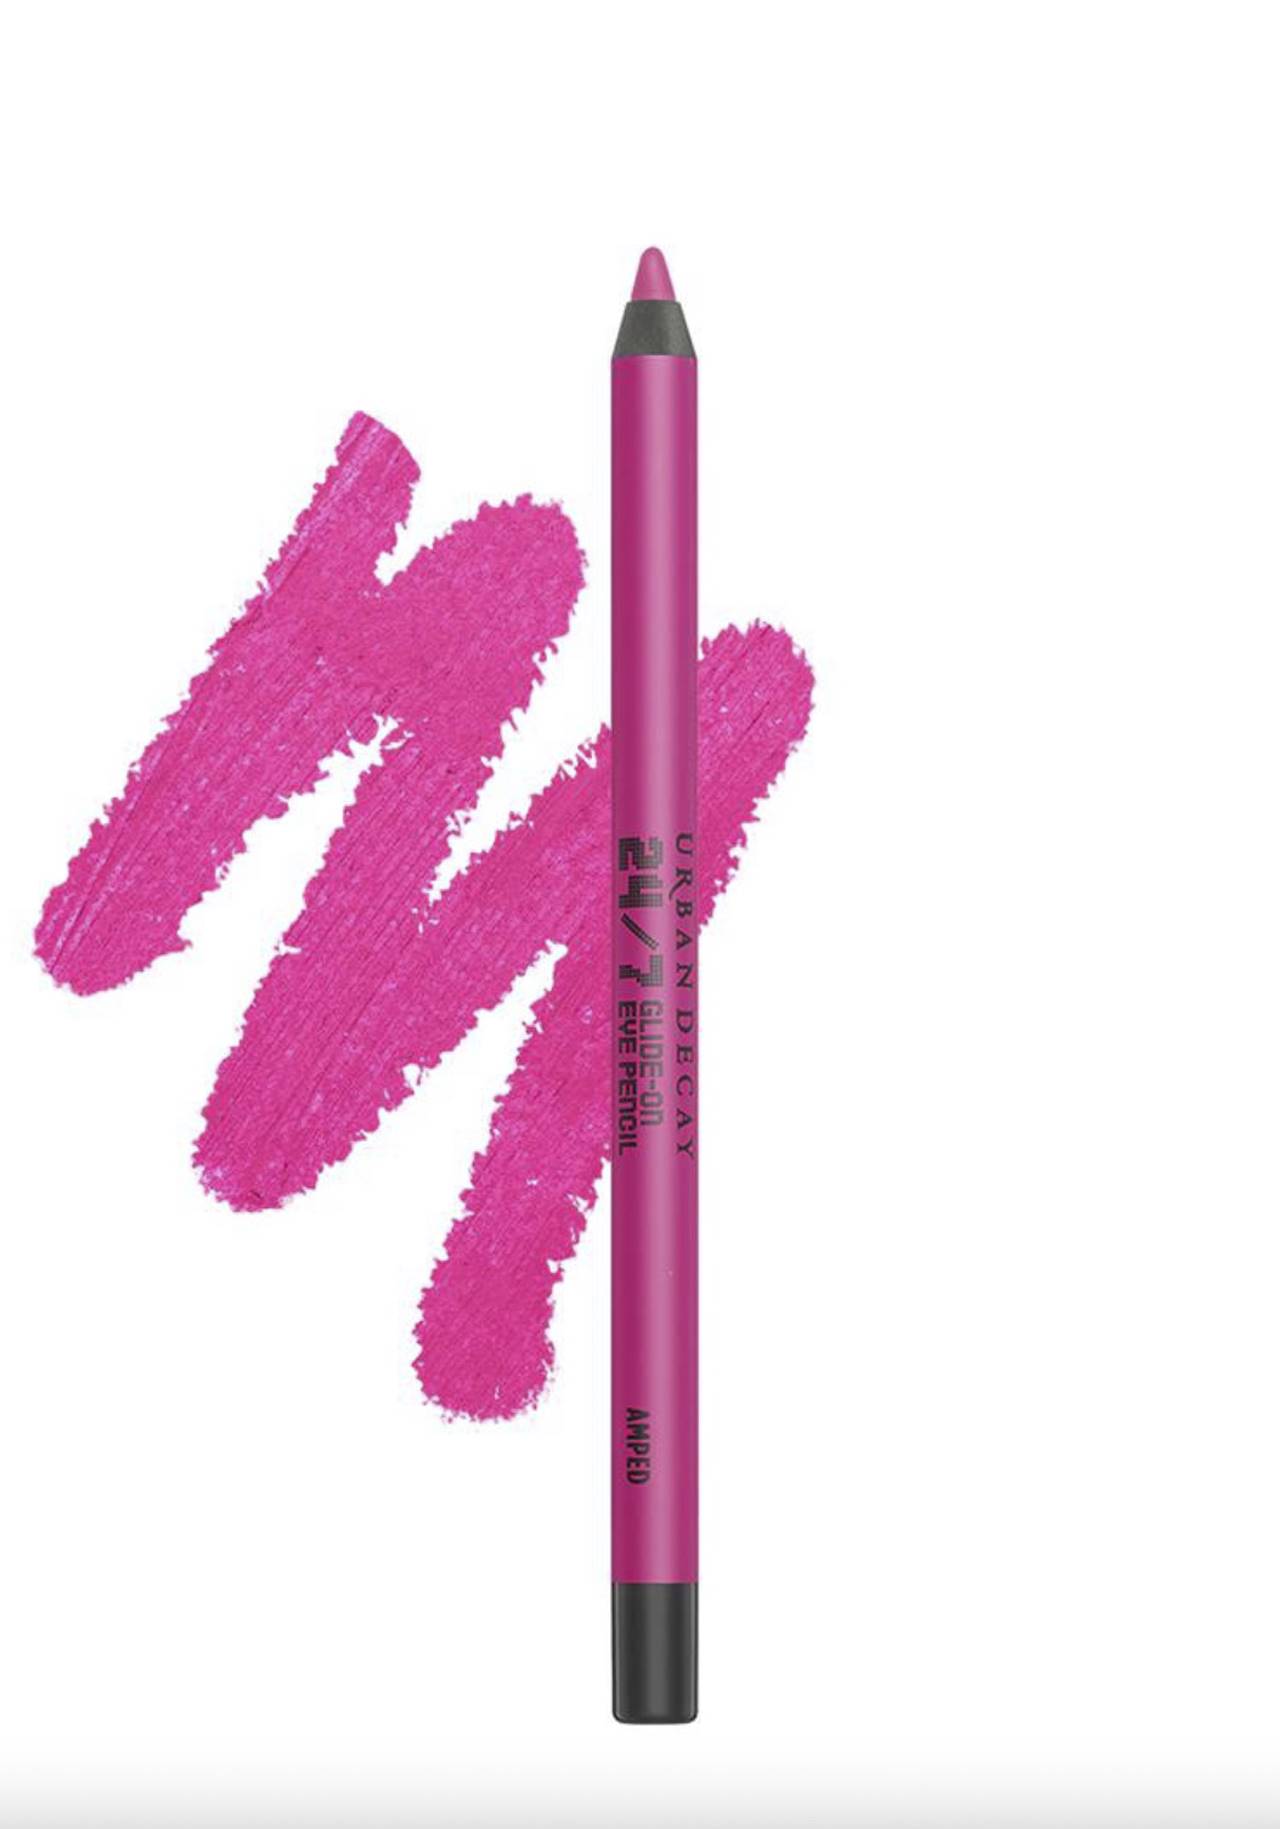 Wired 24/7 Glide-On de Urban Decay